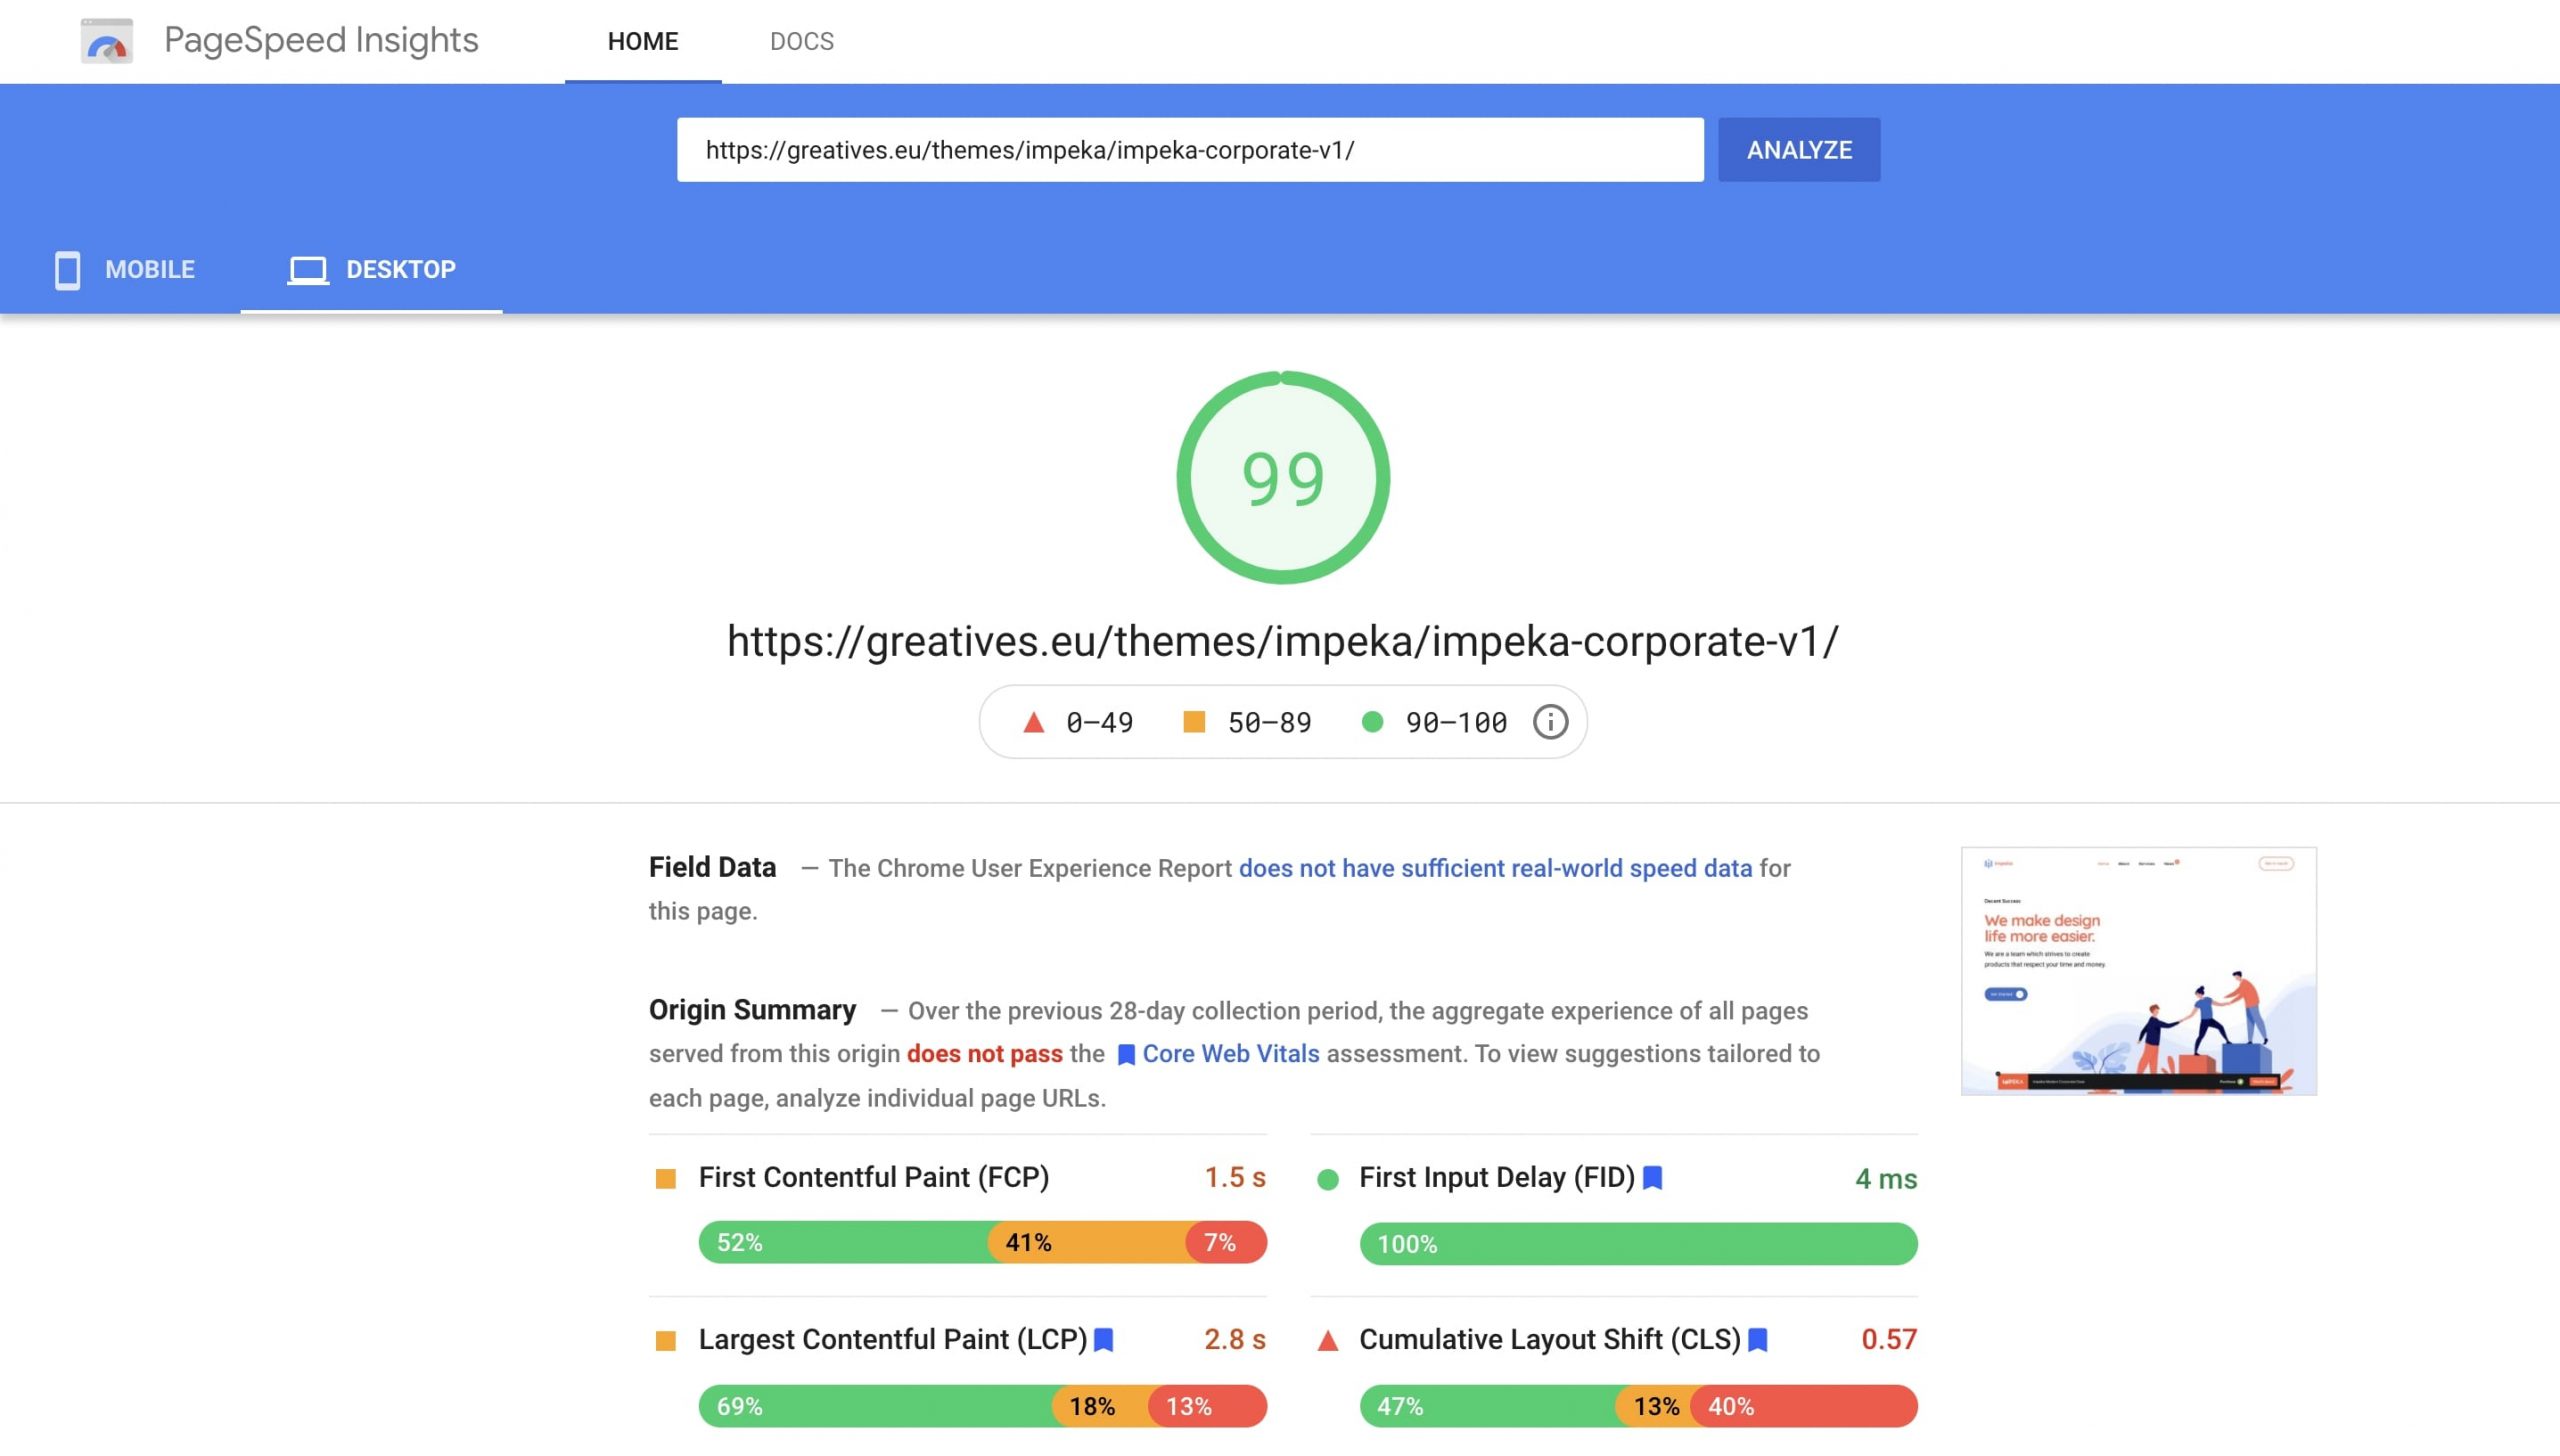 Impeka Corporate on PageSpeed Insights